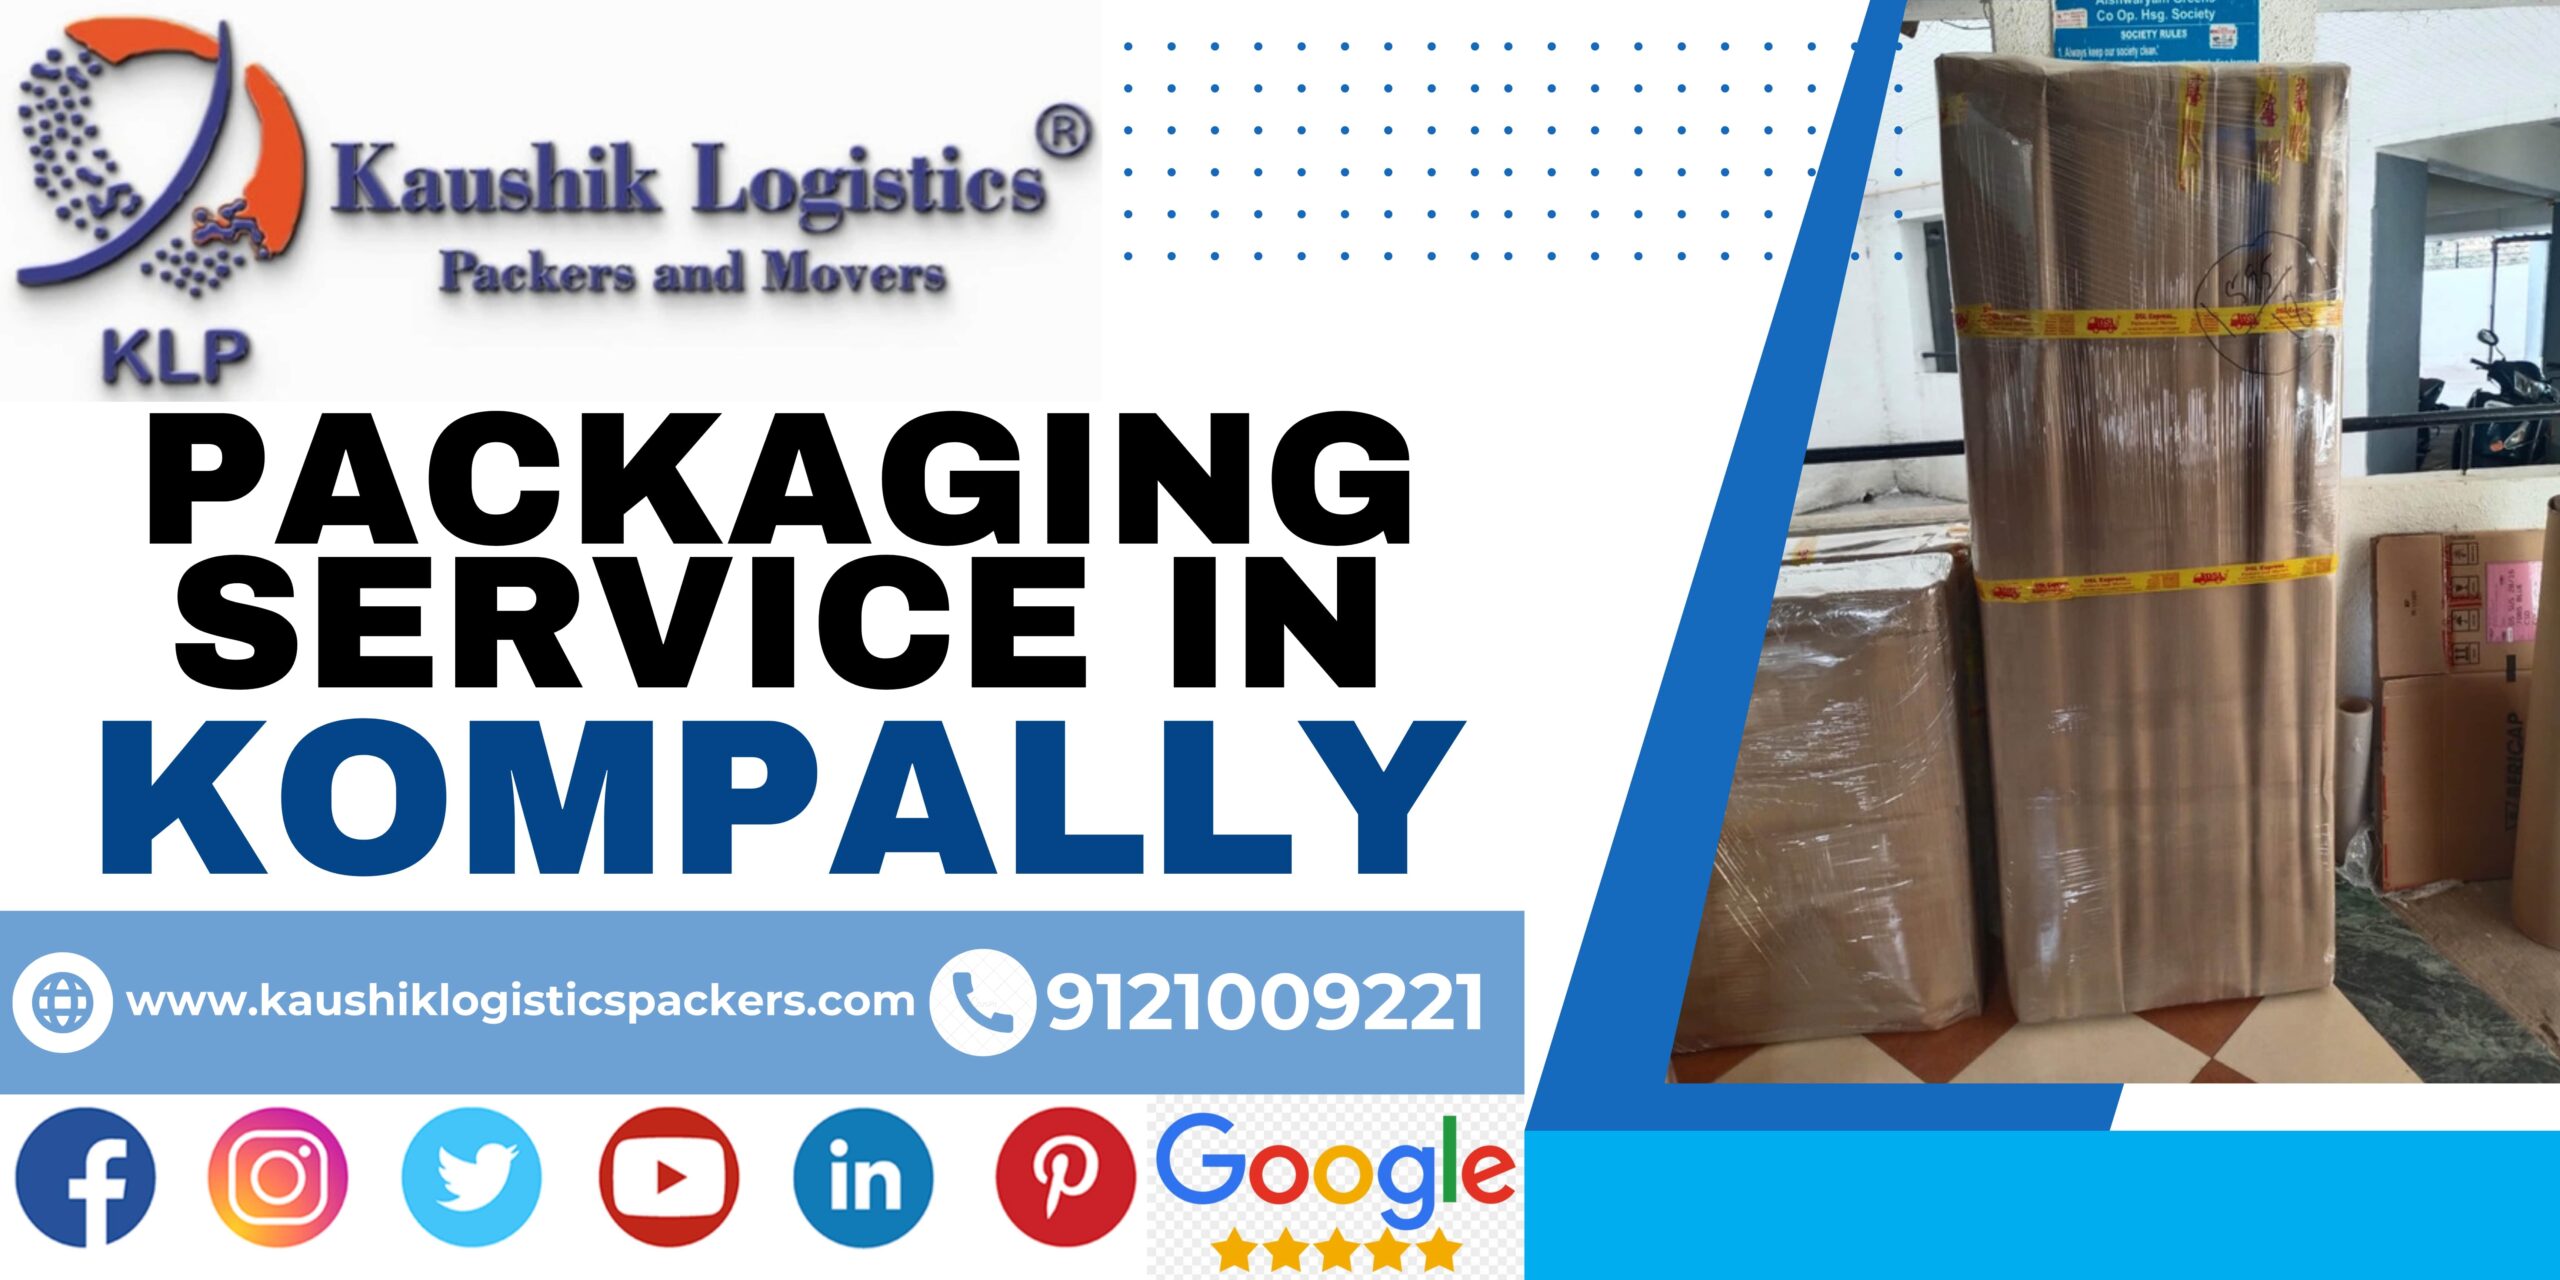 Packers and Movers In Kompally